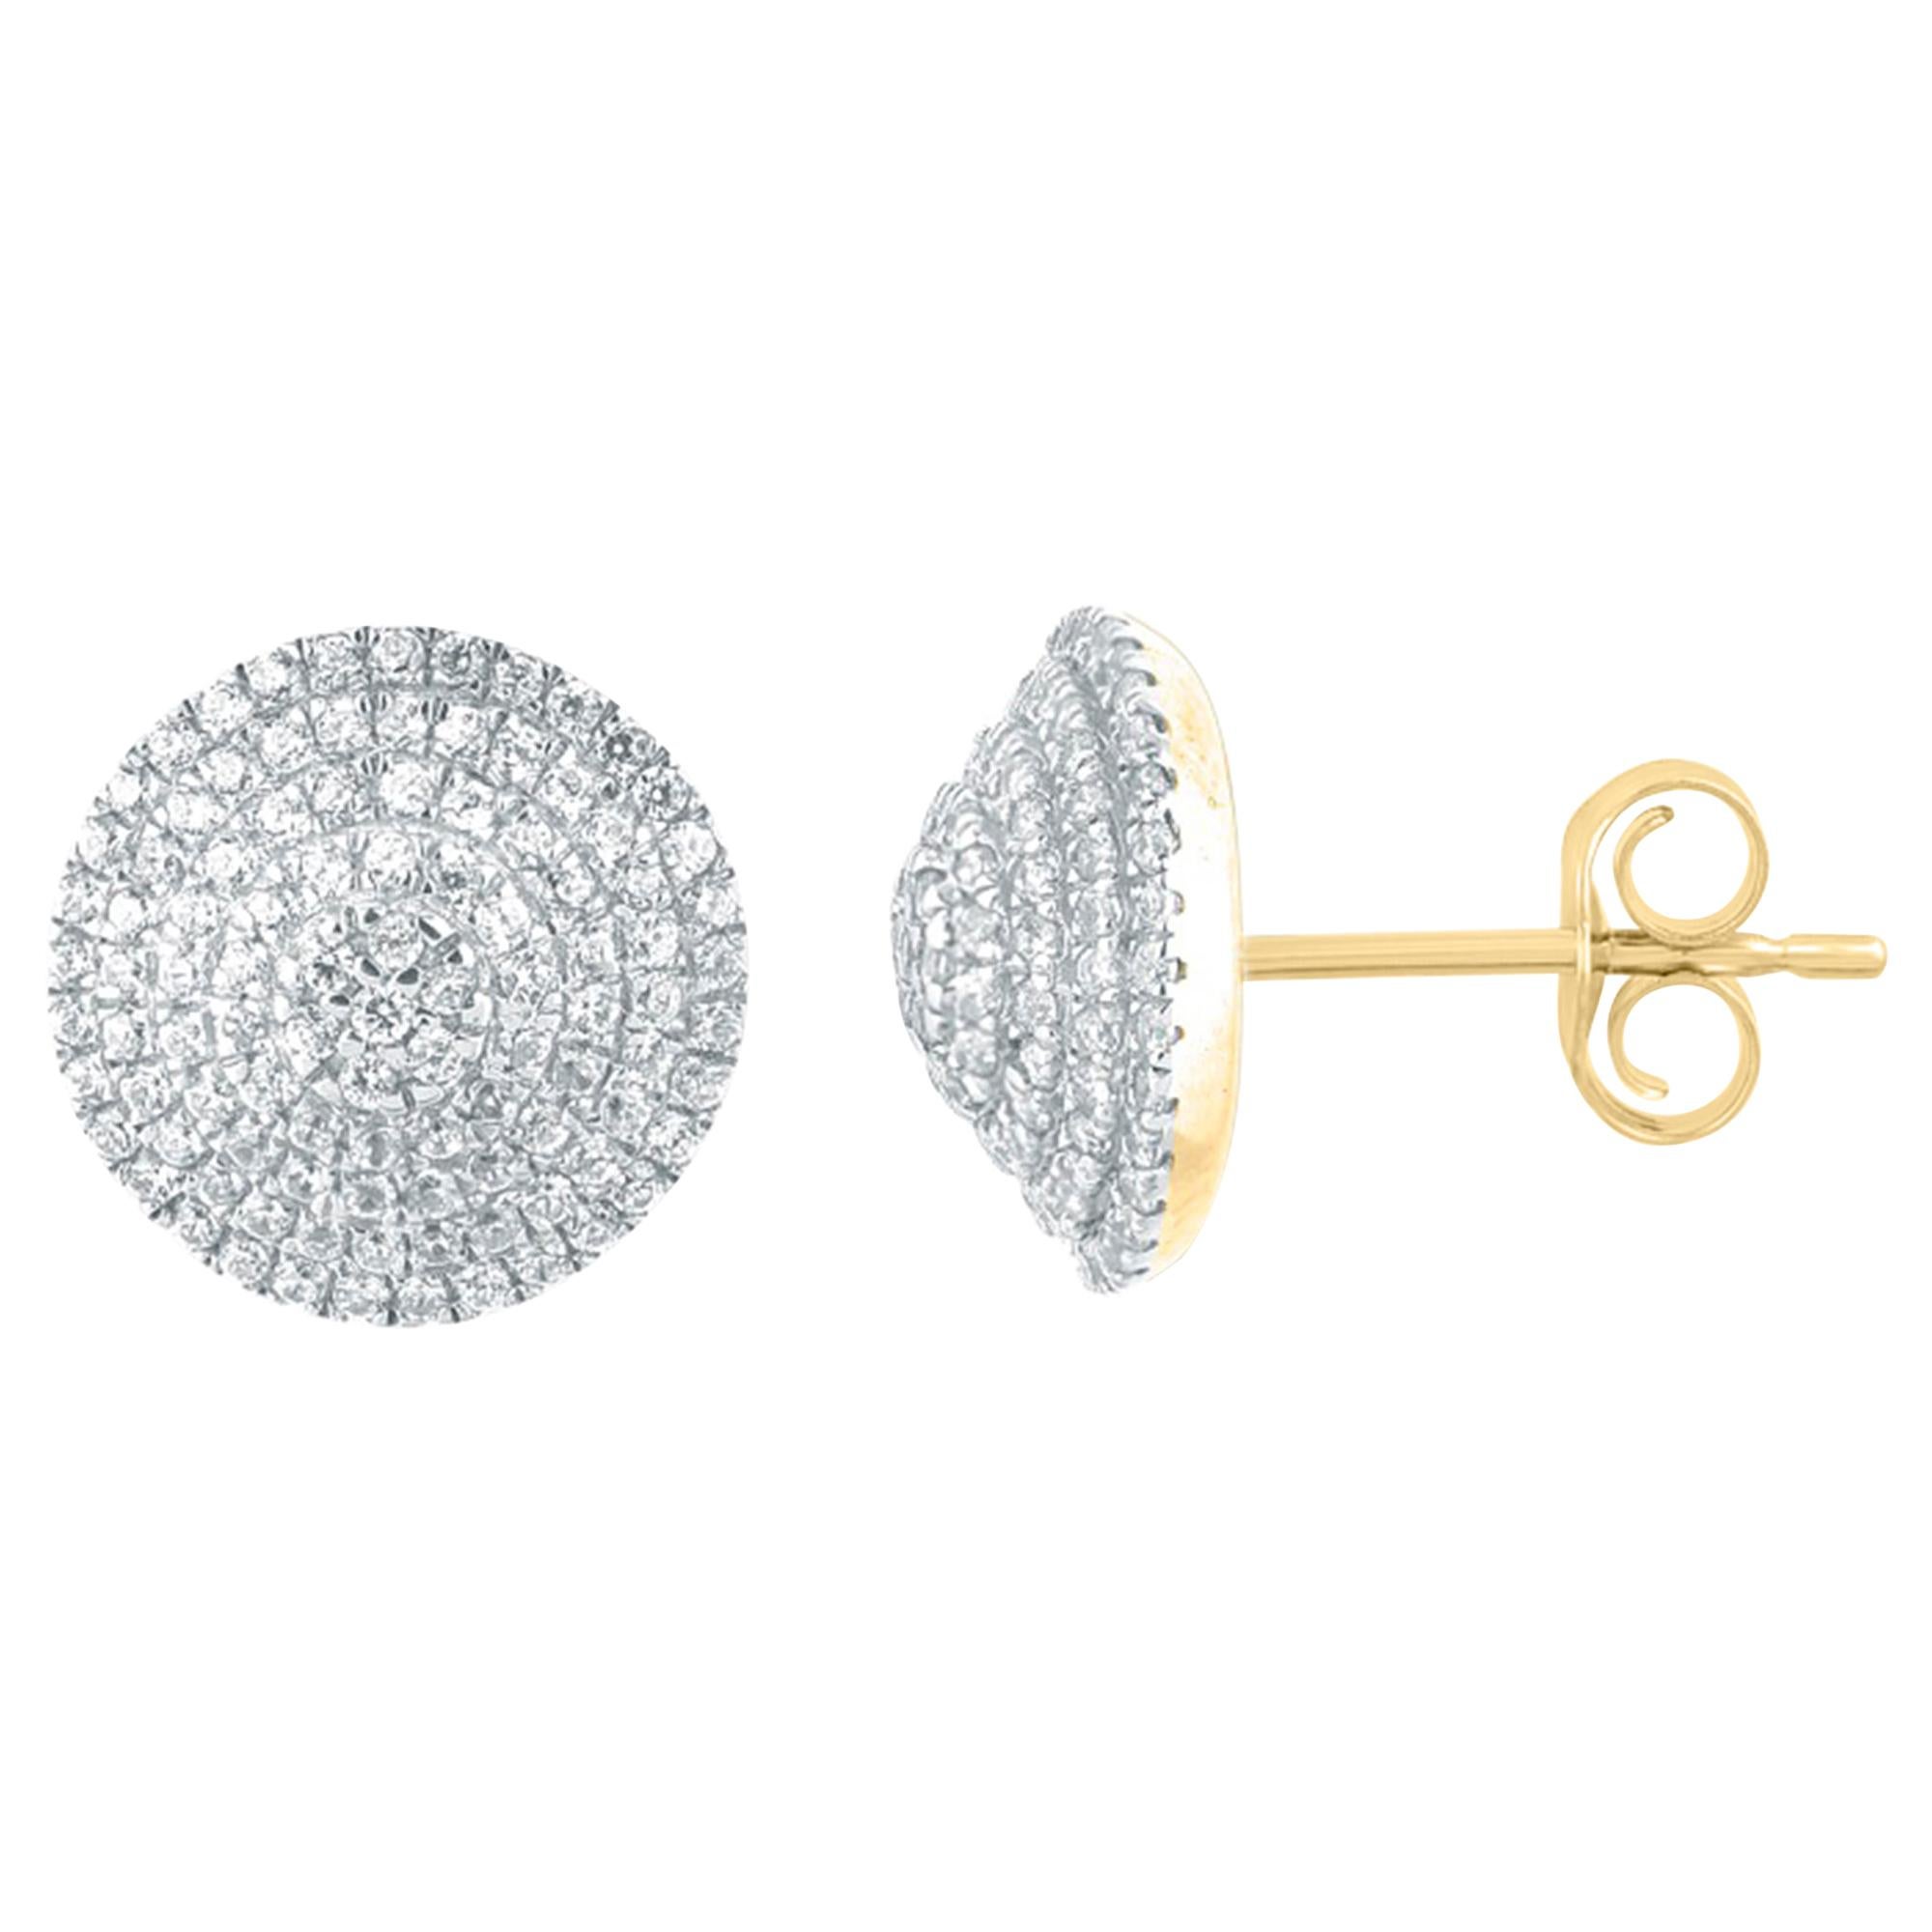 TJD 0.50 Carat Round Diamond 18 Kt Yellow Gold Multi Halo Fashion Stud Earrings For Sale